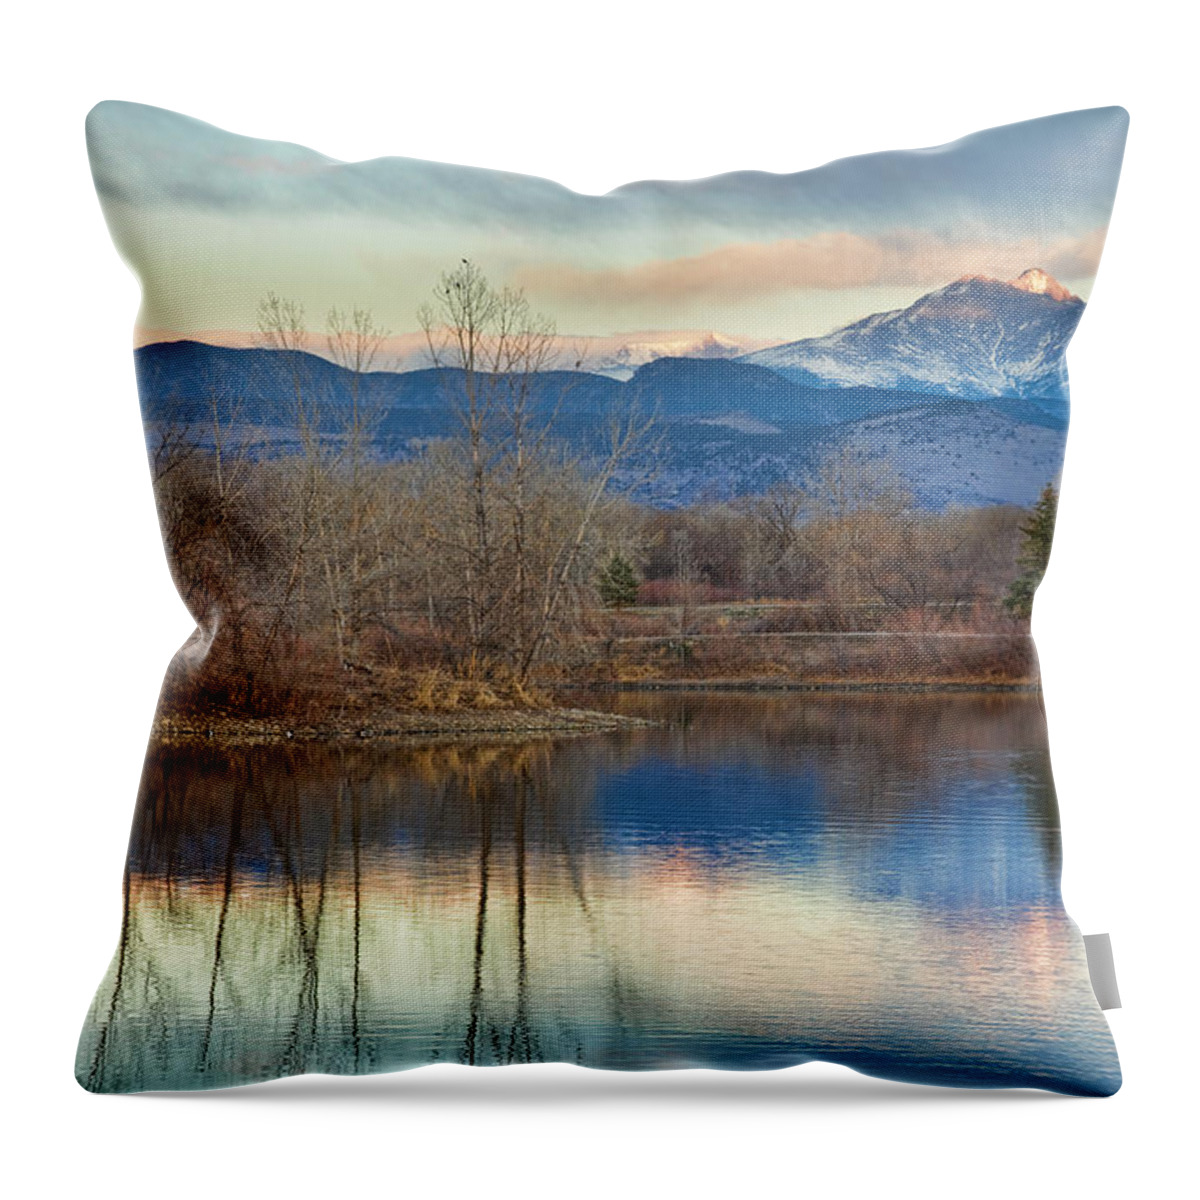 'twin Peaks' Colorado Throw Pillow featuring the photograph Longs Peak from Golden Ponds by James BO Insogna